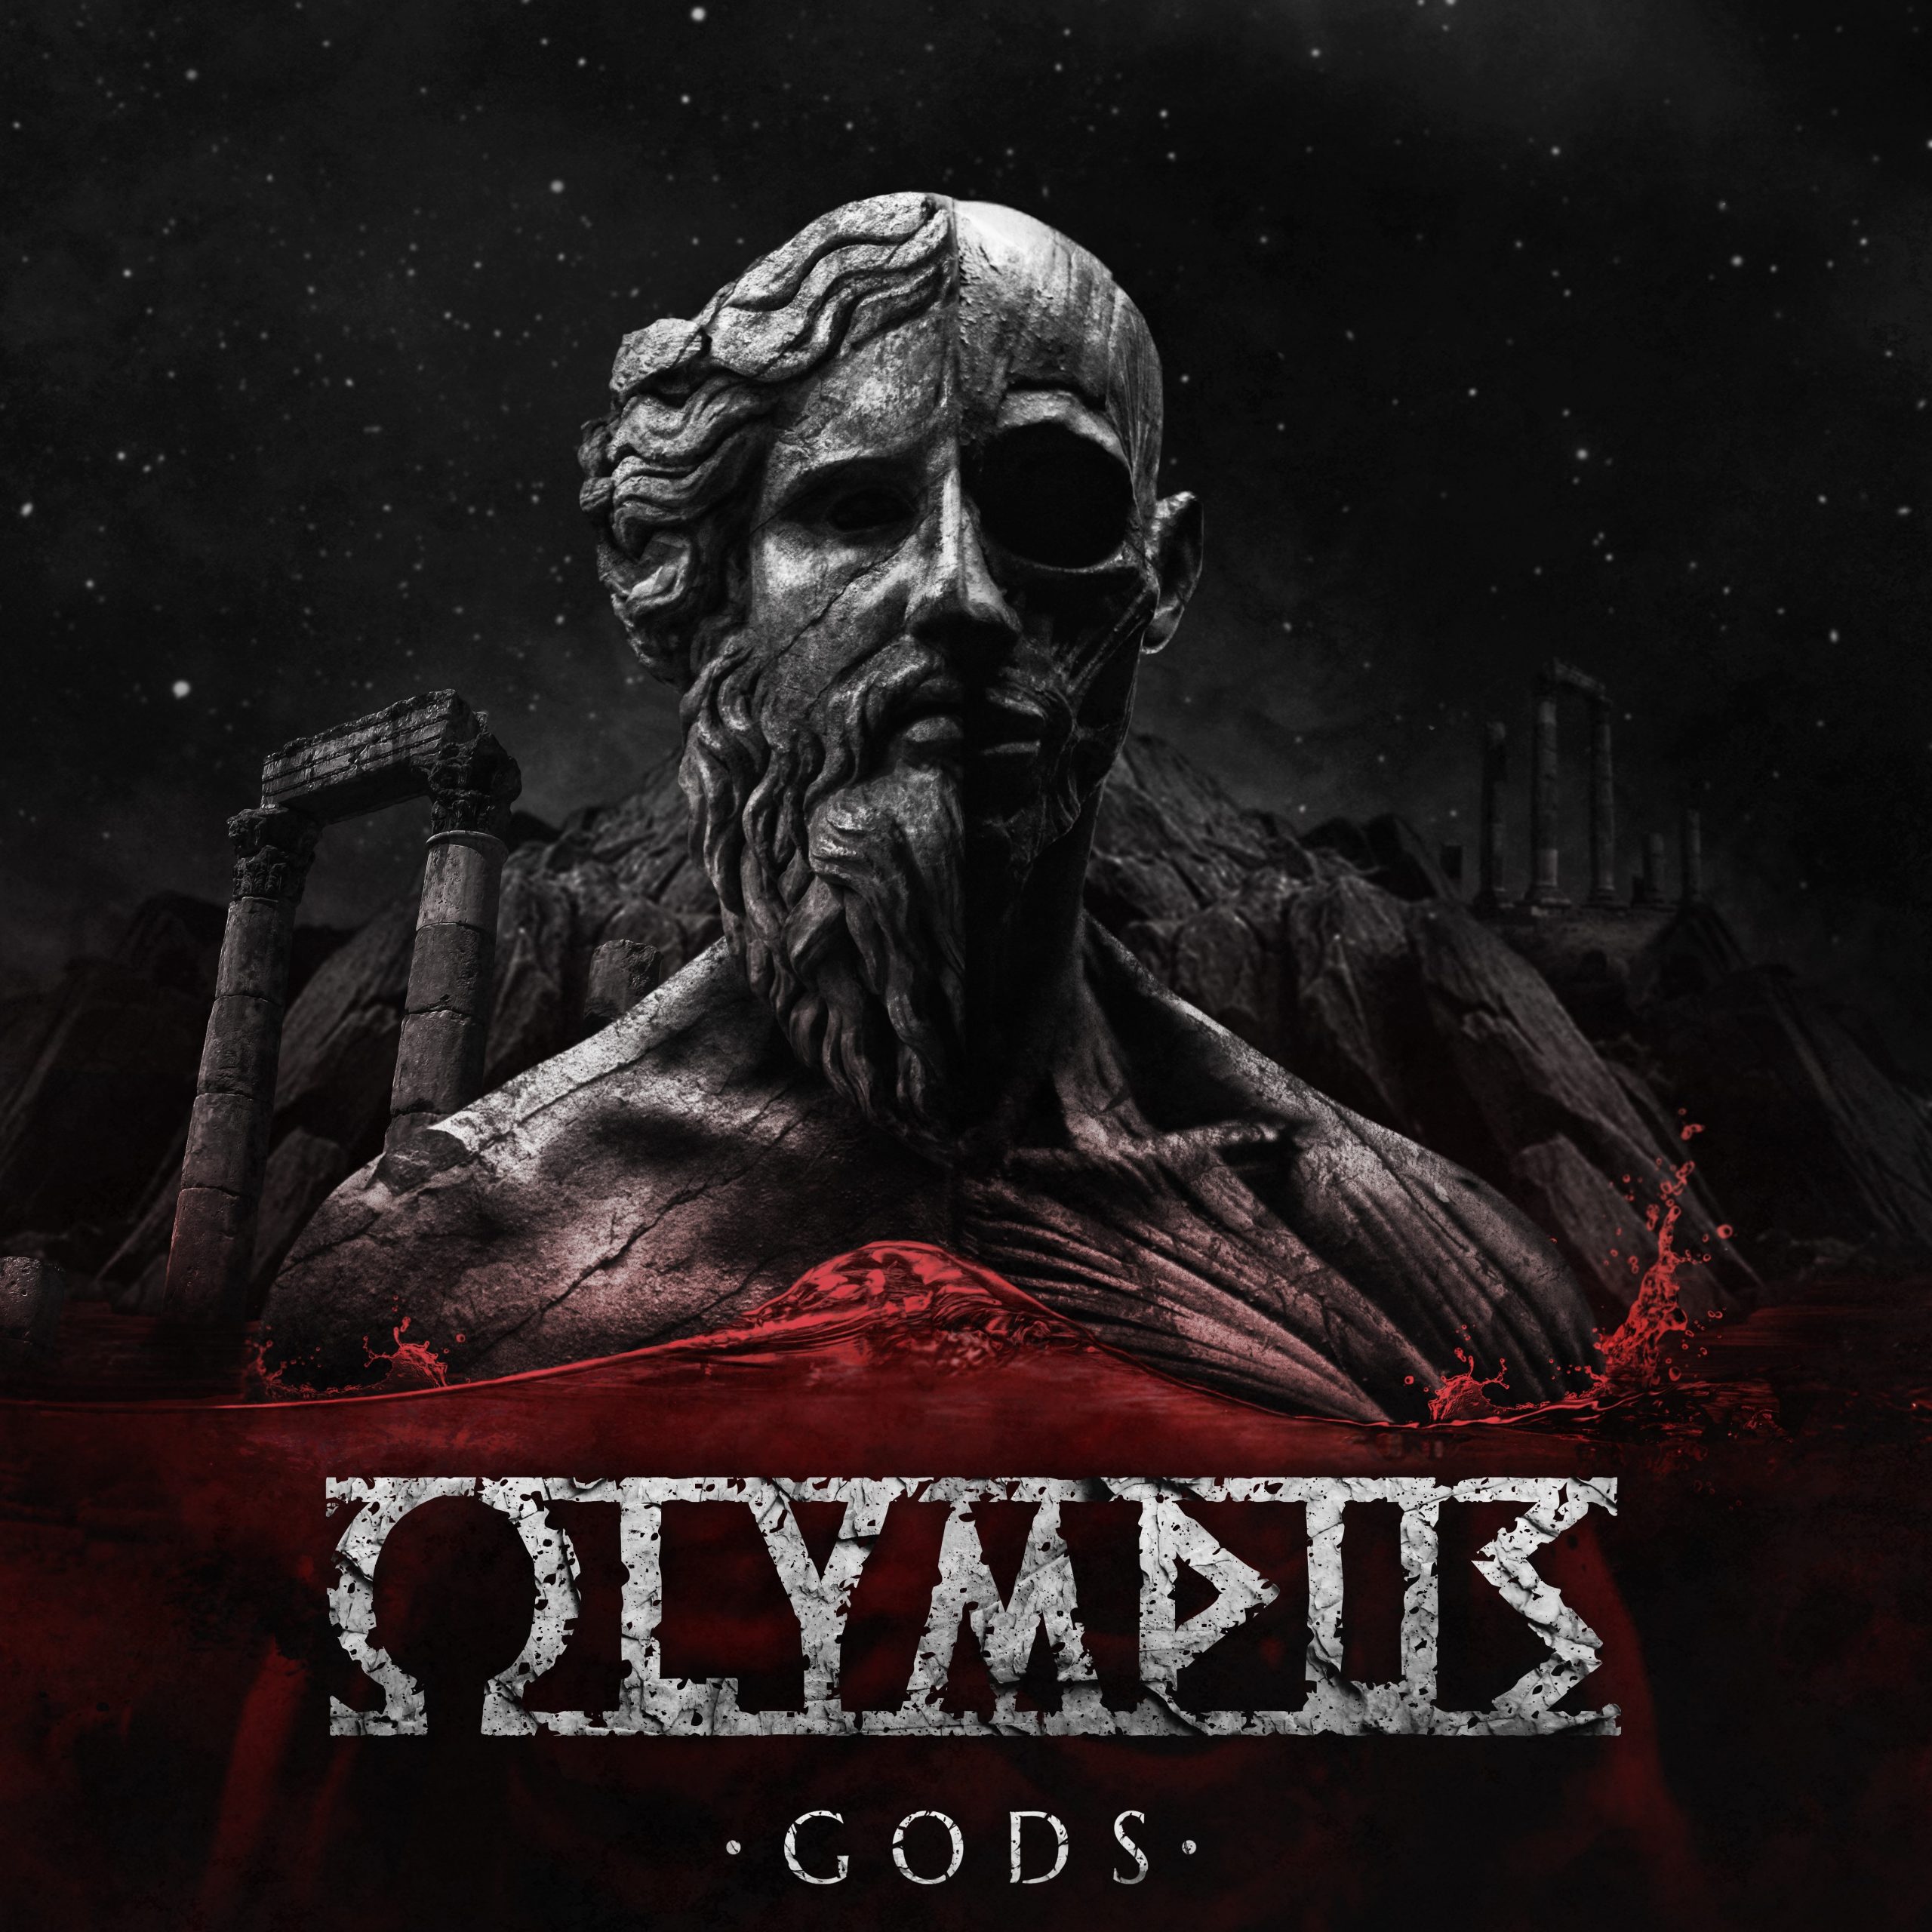 Olympus’s new album is a brutal, dark death metal descent into madness